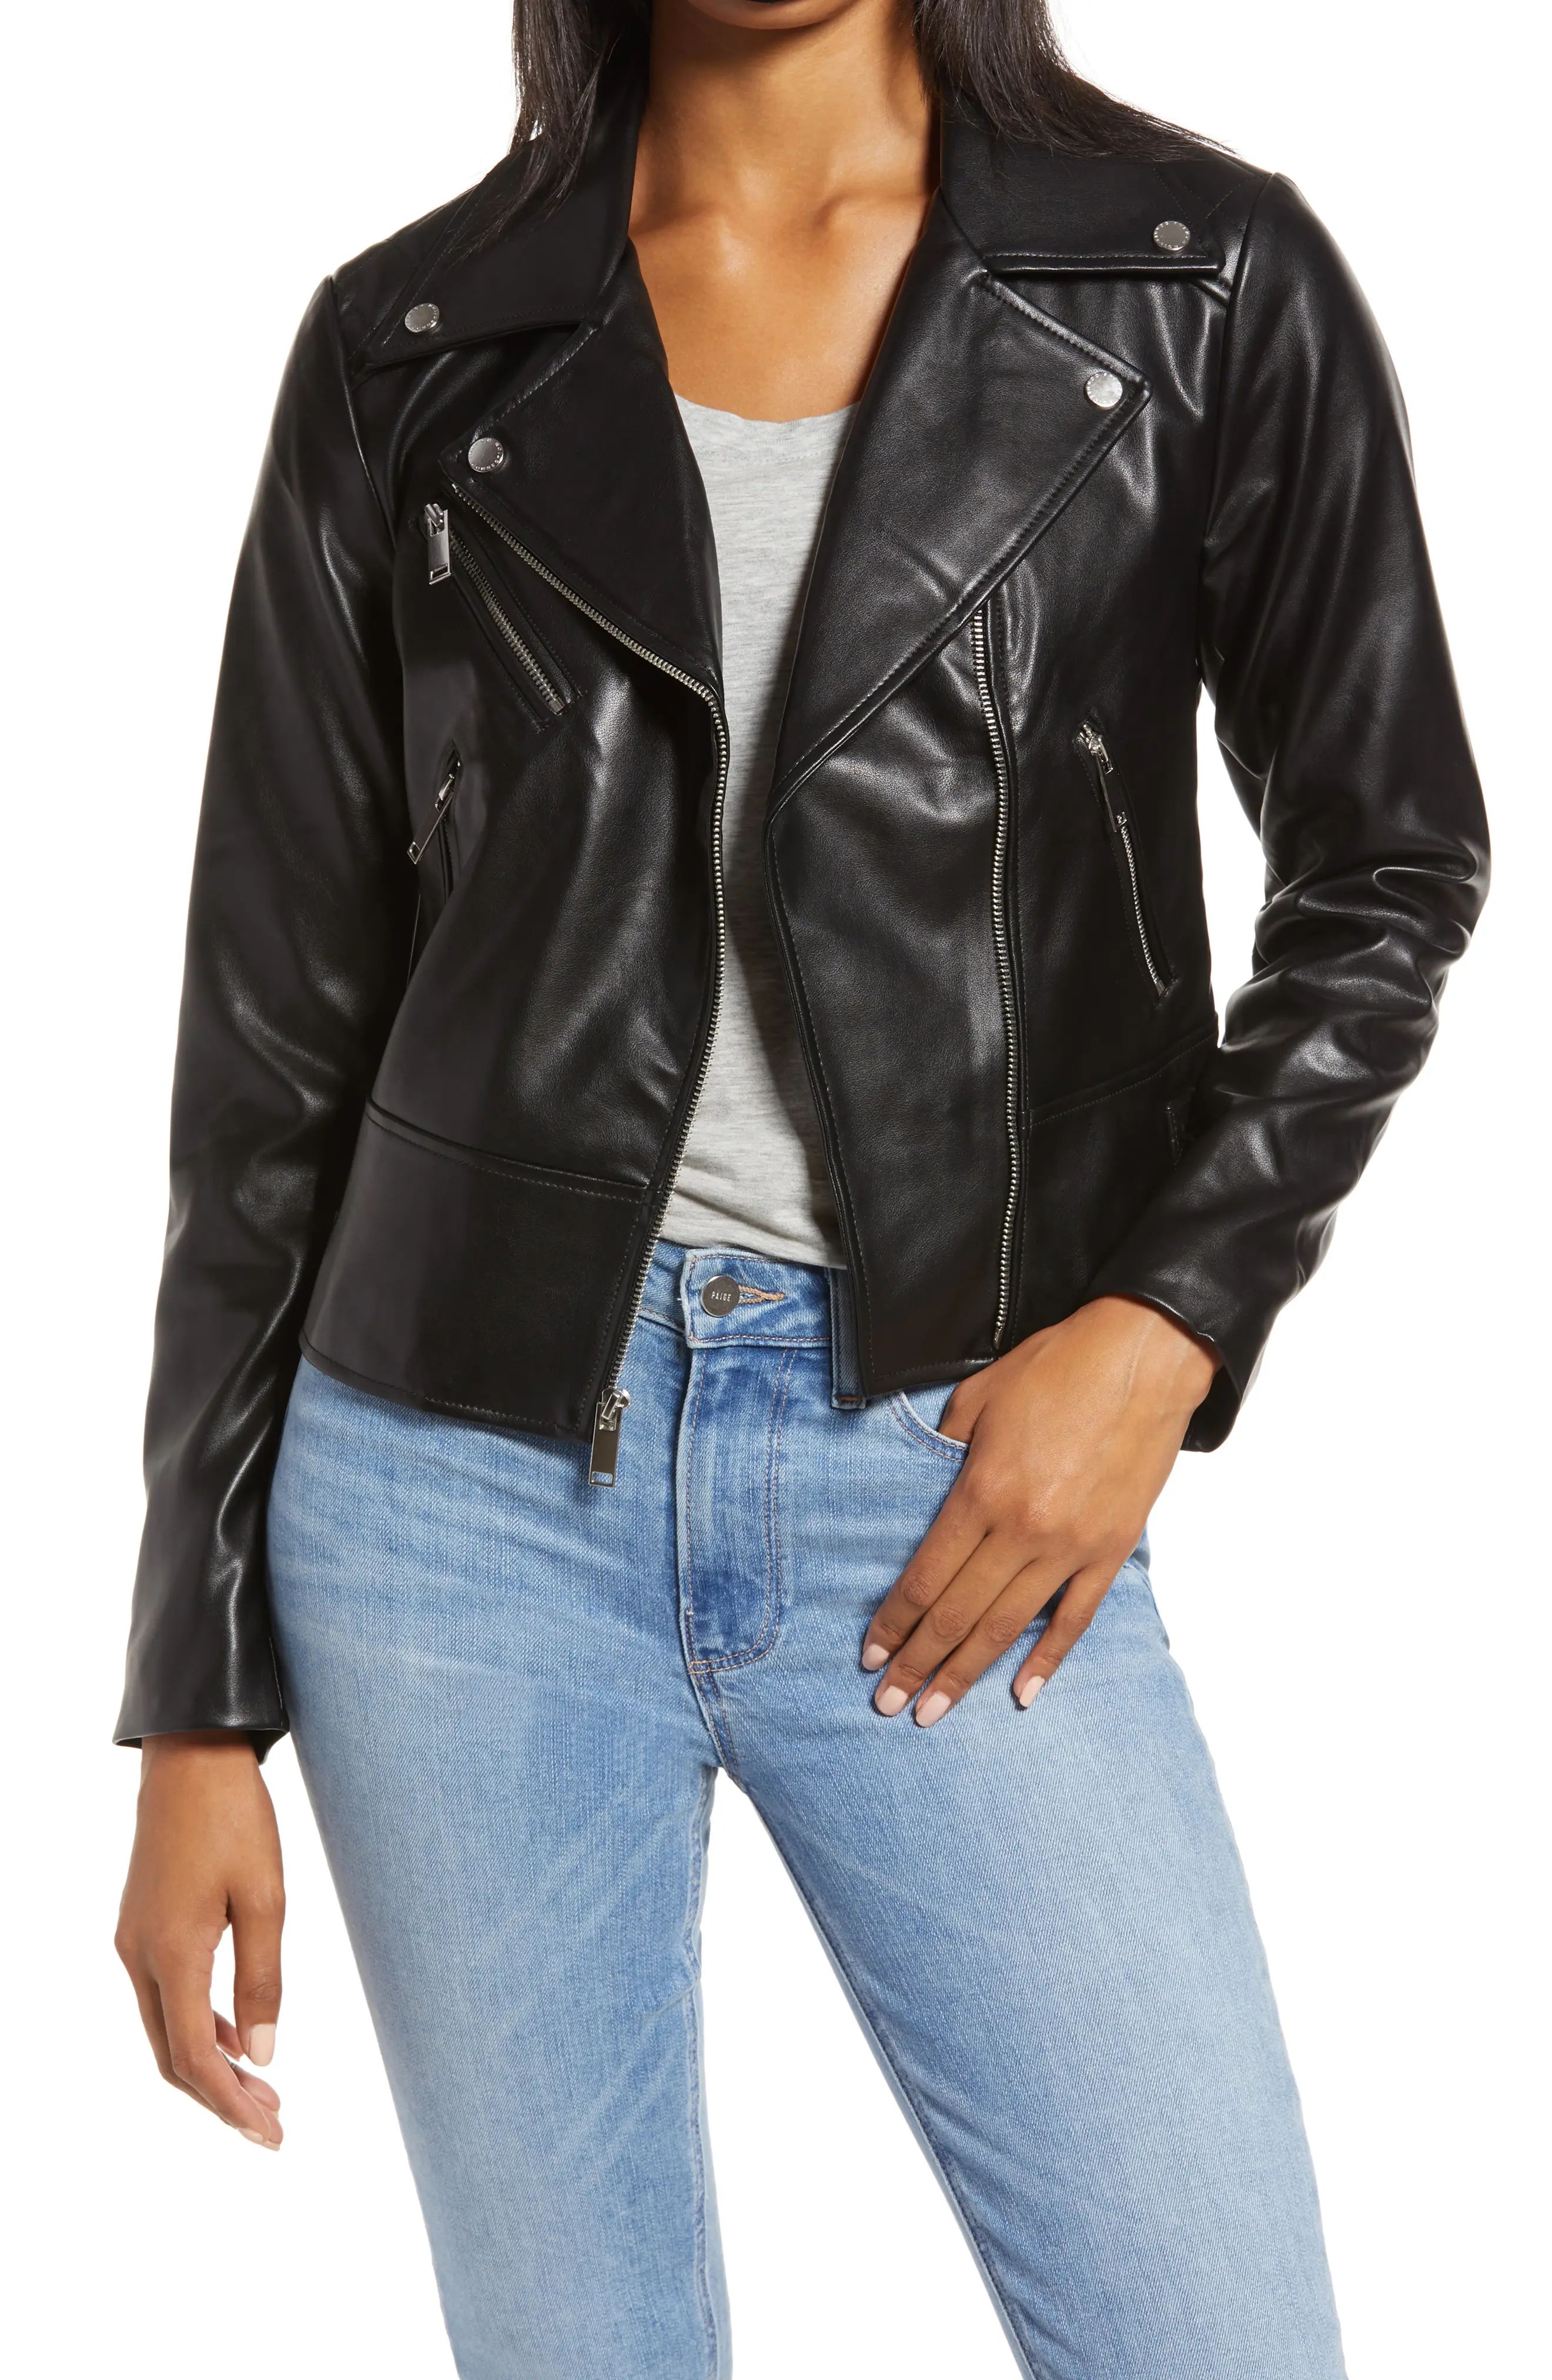 Women's French Connection Faux Leather Moto Jacket, Size X-Small - Black | Nordstrom